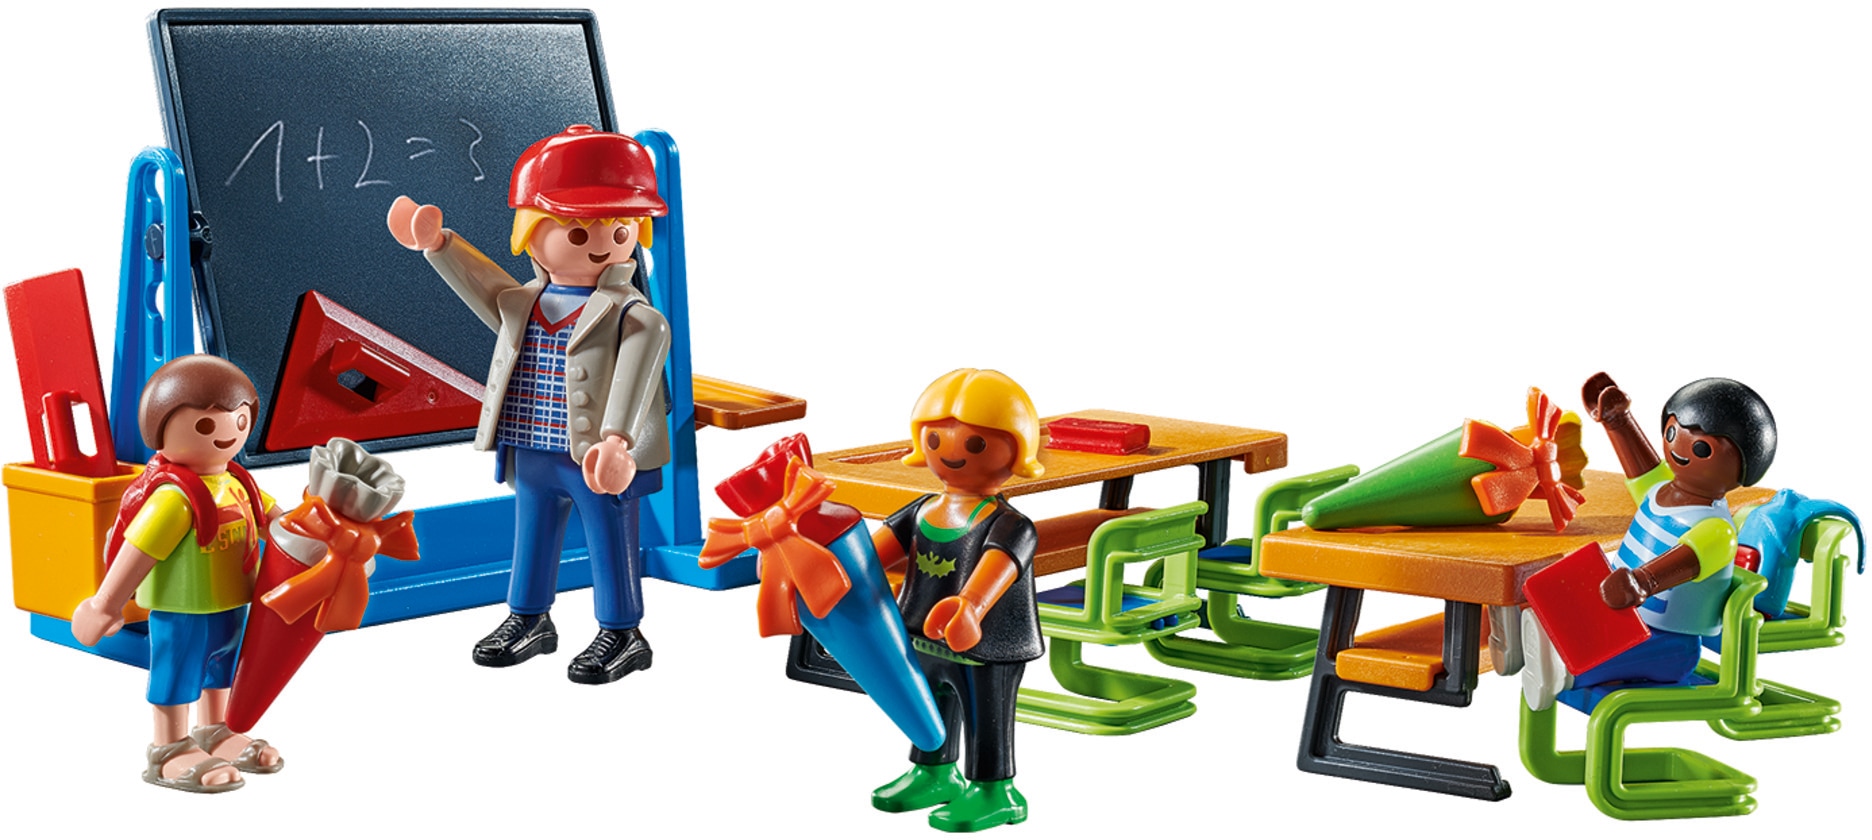 Playmobil City Life Poolparty 70987 desde 46,99 €